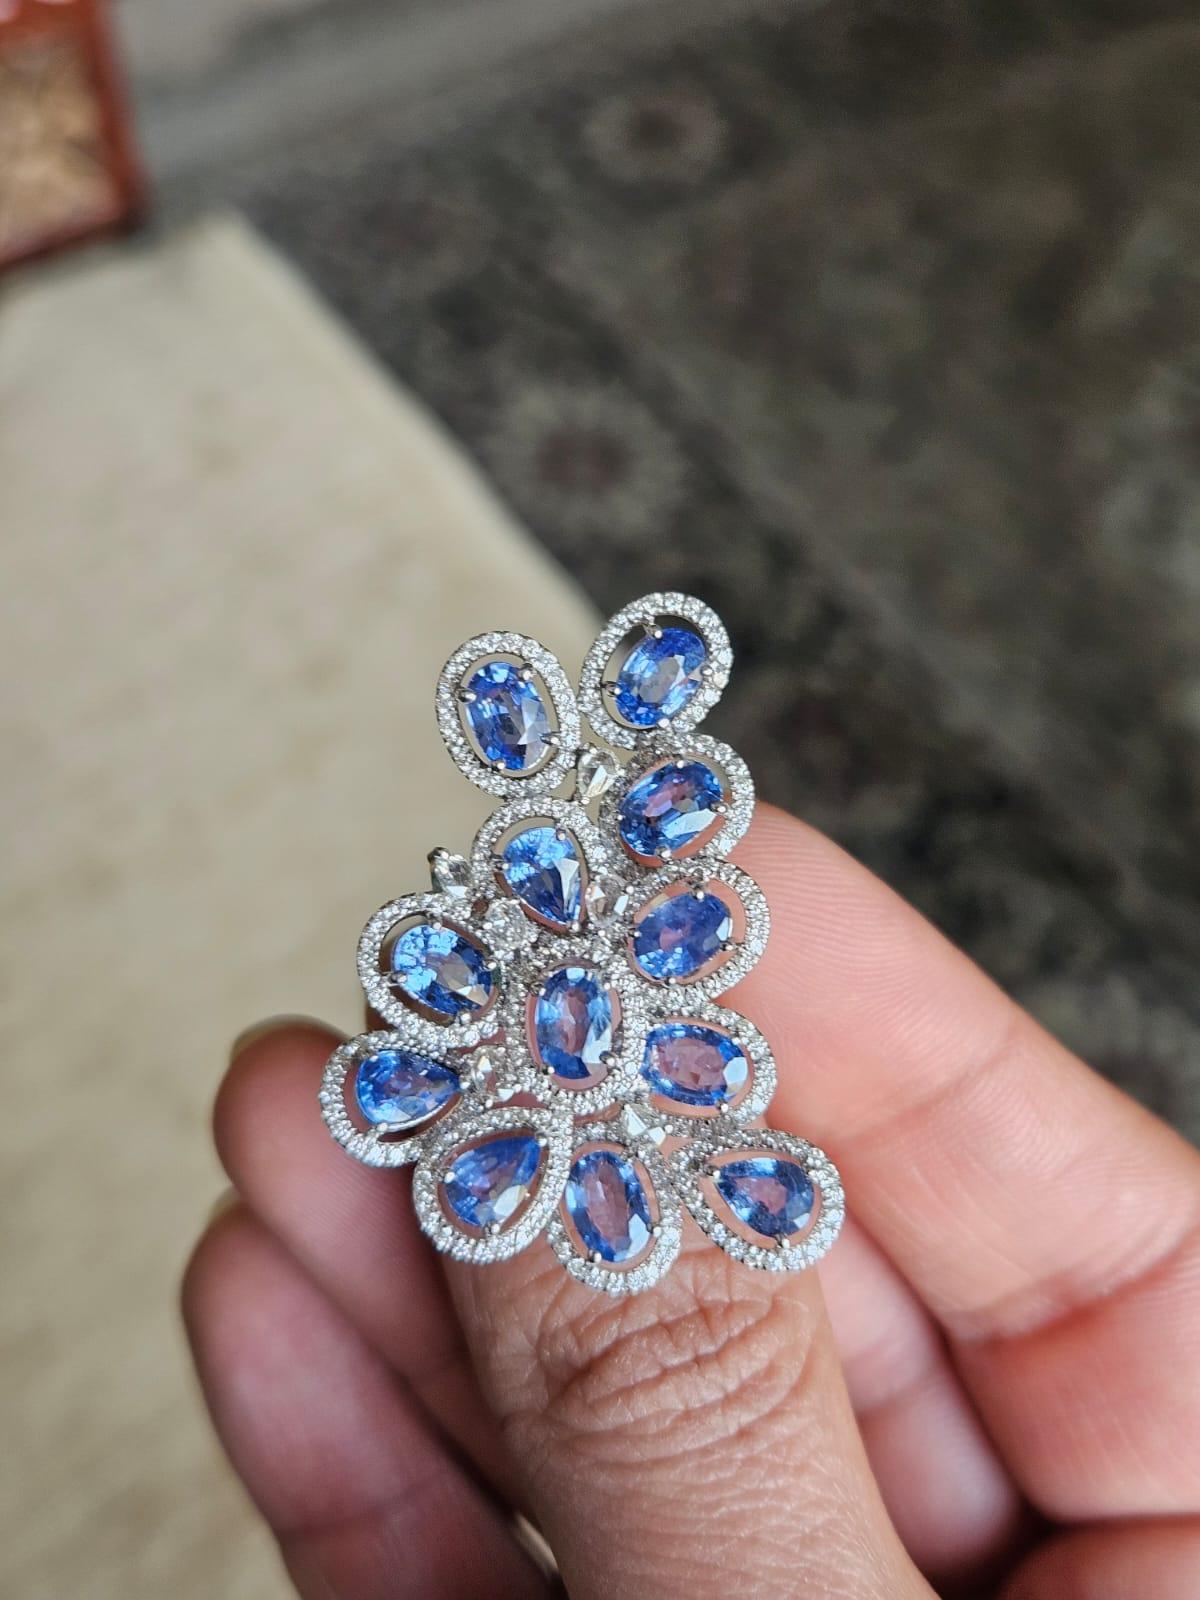 A very gorgeous and beautiful, Blue Sapphire Cocktail Ring set in 18K White Gold & Diamonds. The weight of the Blue Sapphires is 6.79 carats. The Blue Sapphires are of Ceylon (Sri Lanka) origin. The combined Diamonds weight is 1.37 carats. Net 18K